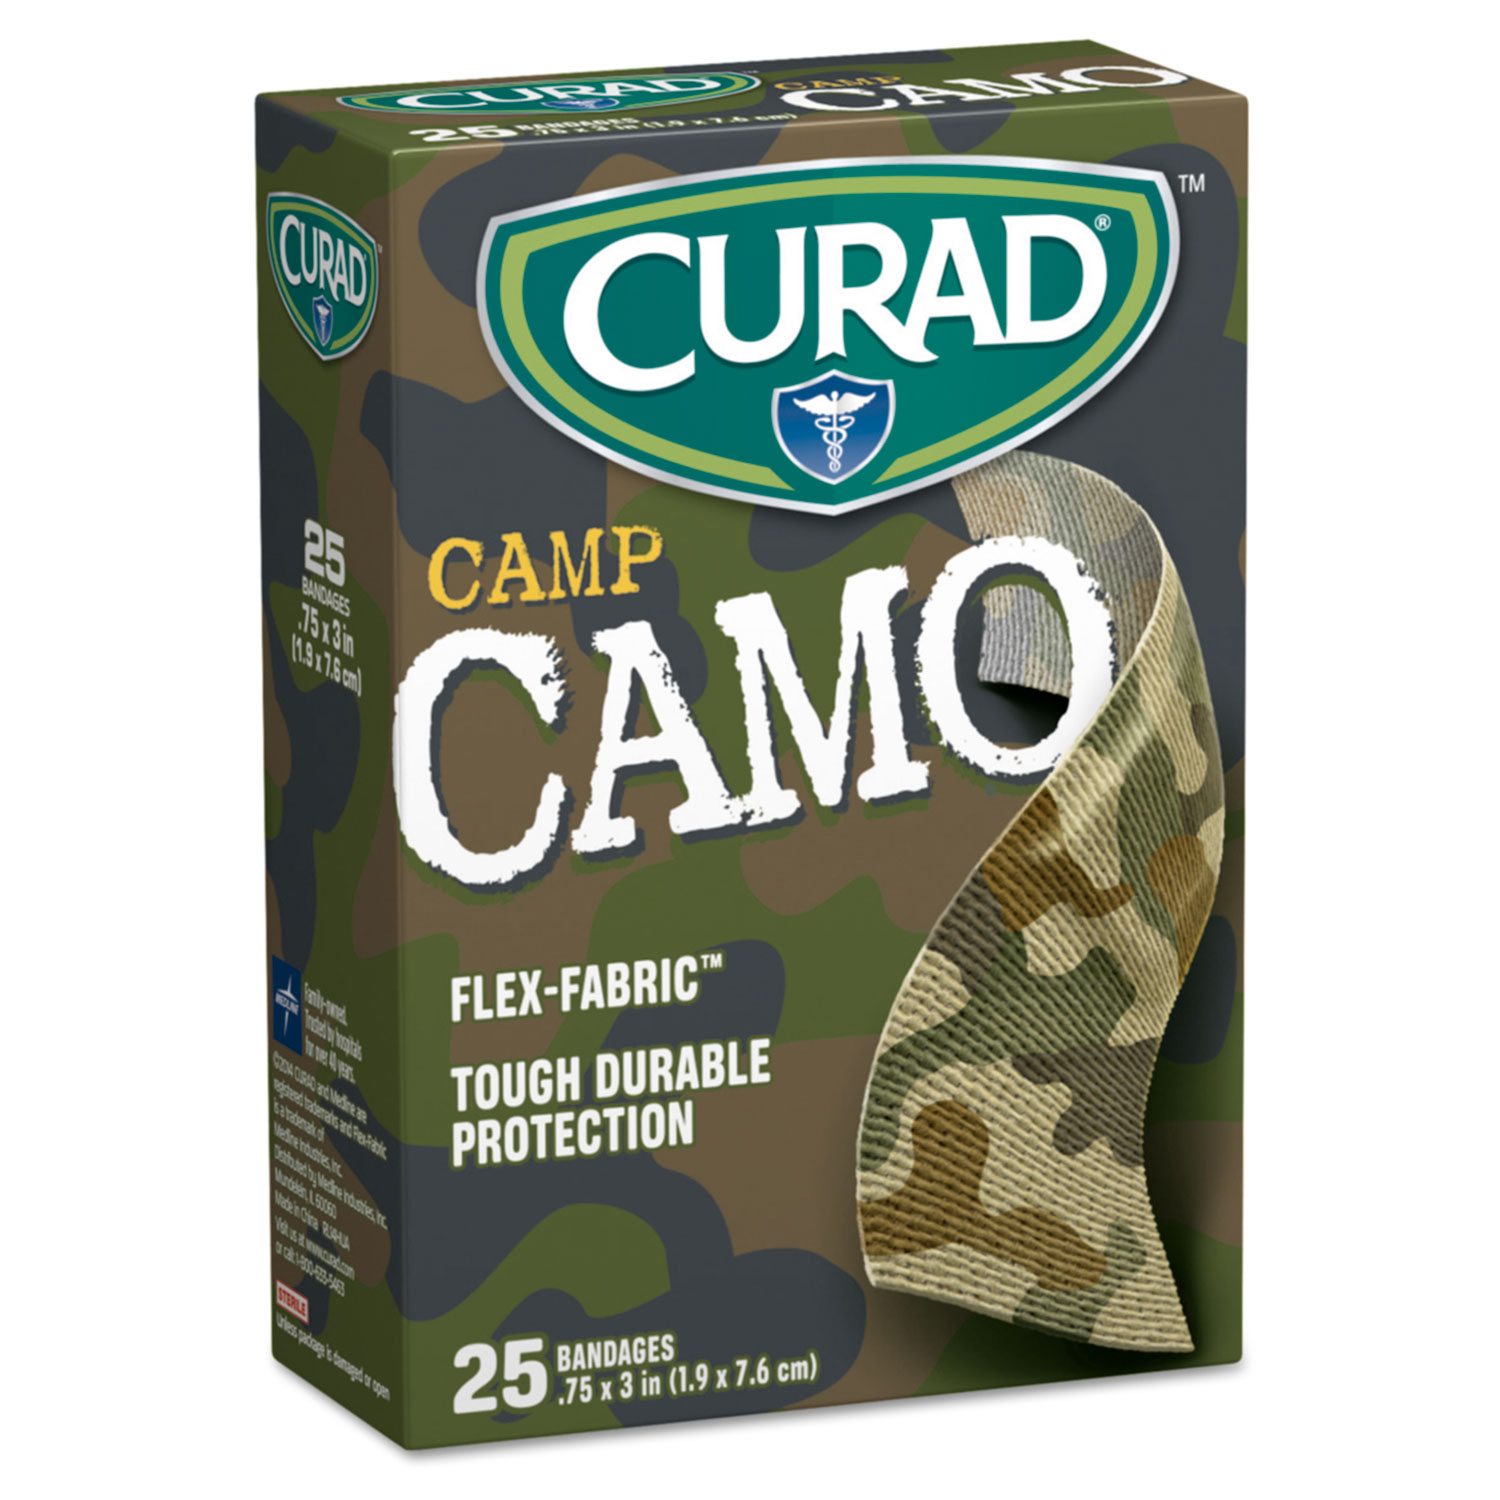  Curad CUR45701RB Kids Adhesive Bandages, Green Camouflage, 3/4 x 3, 25/Box (MIICUR45701RB) 